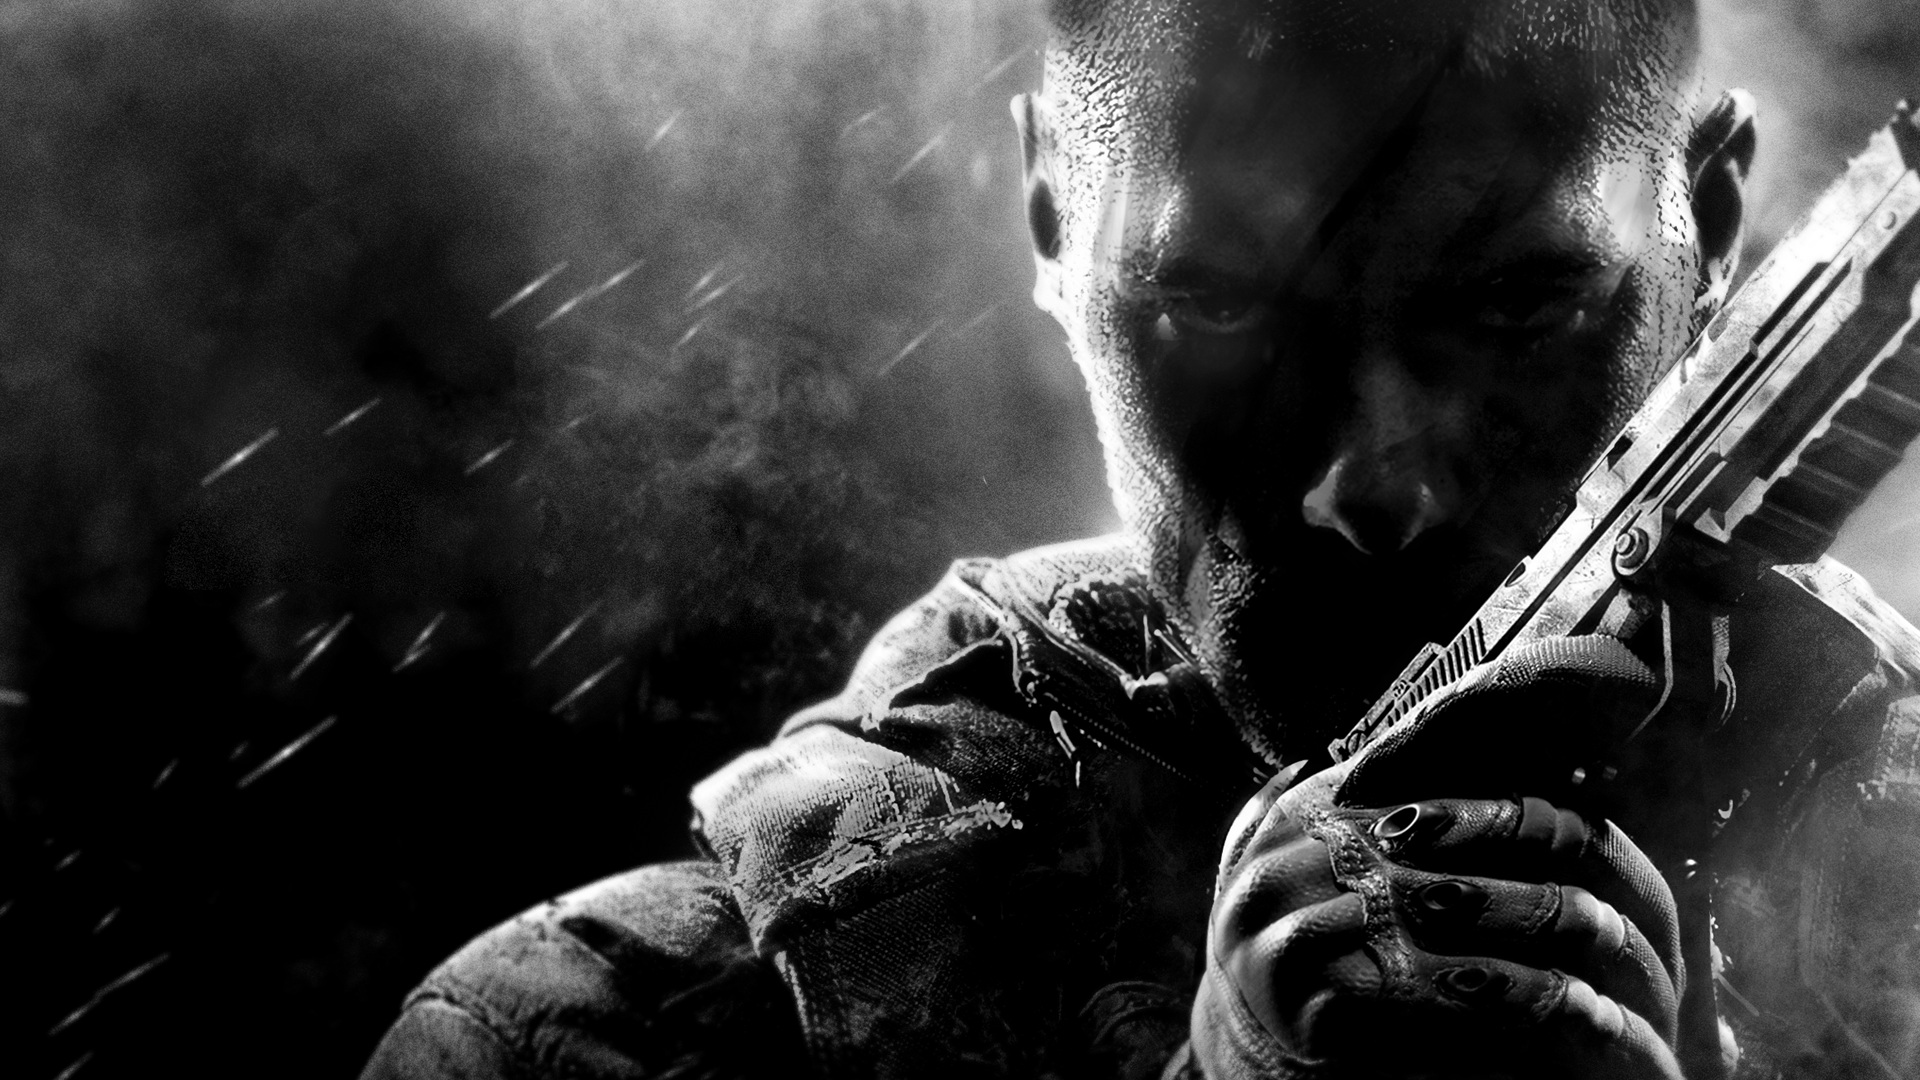 bo2 wallpaper,movie,black and white,photography,action film,fictional character